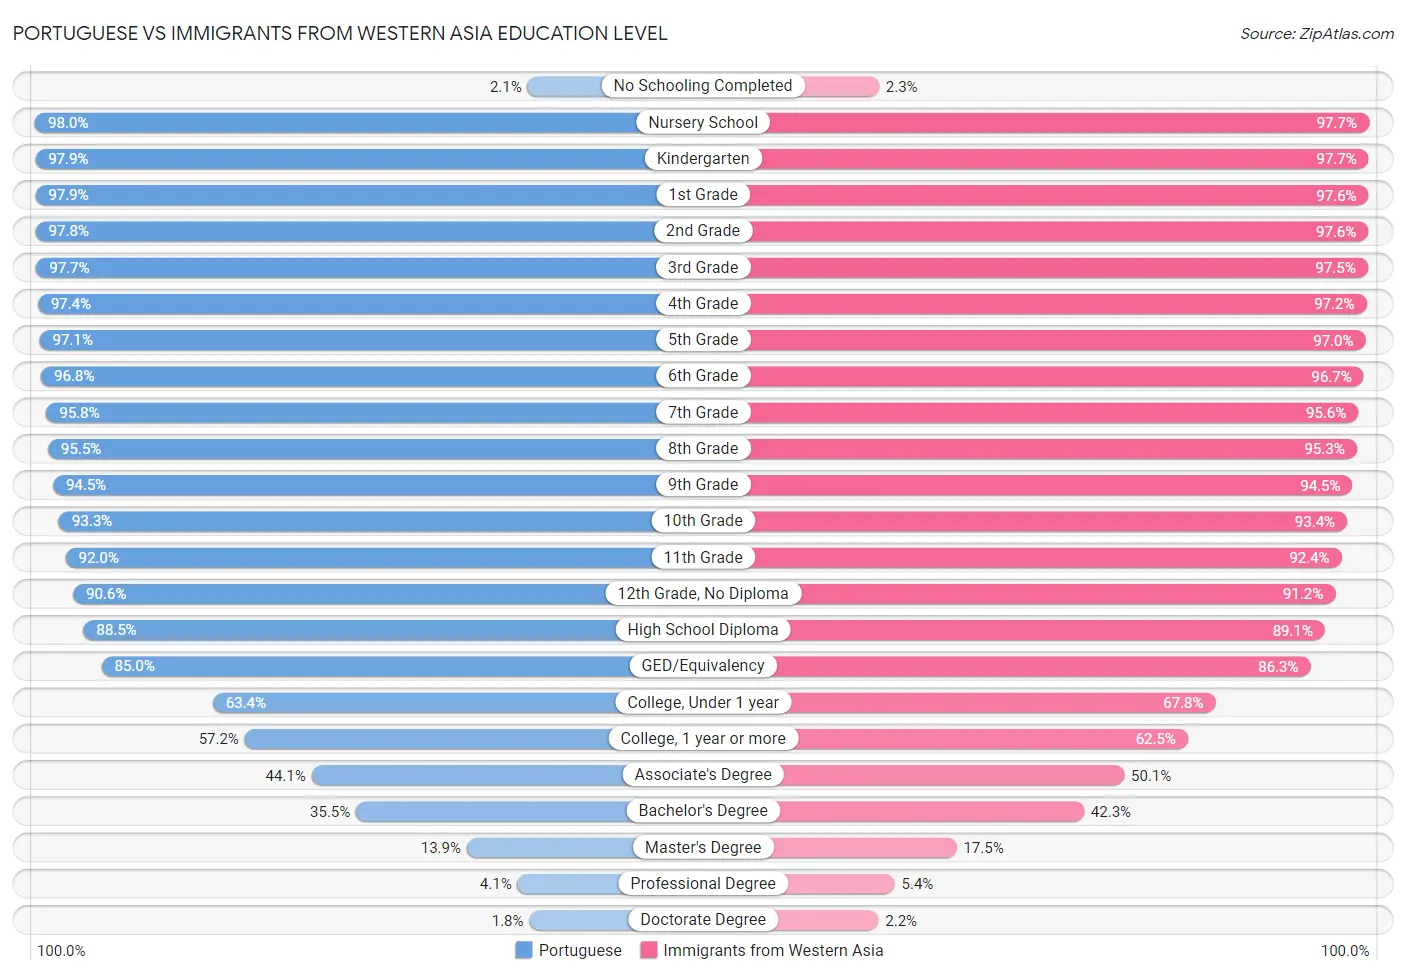 Portuguese vs Immigrants from Western Asia Education Level